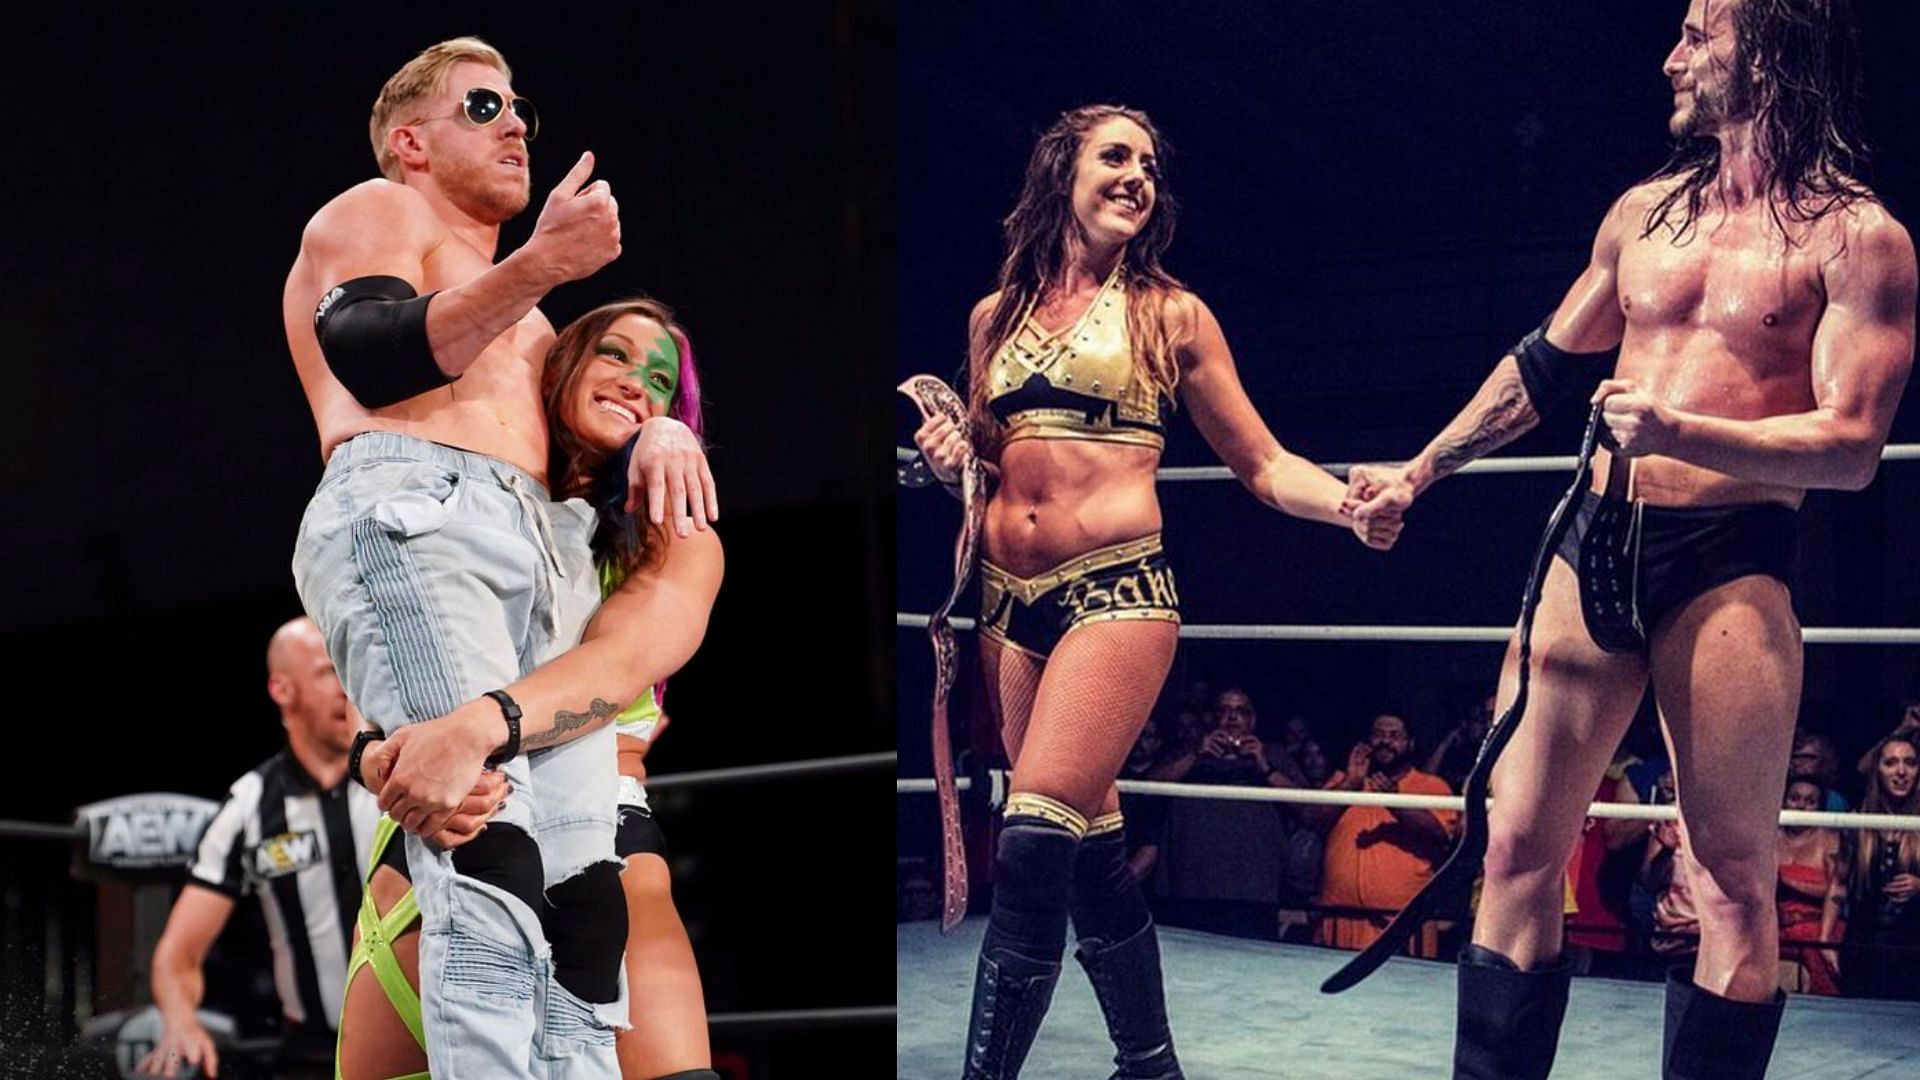 Which mixed tag team would you like to see?